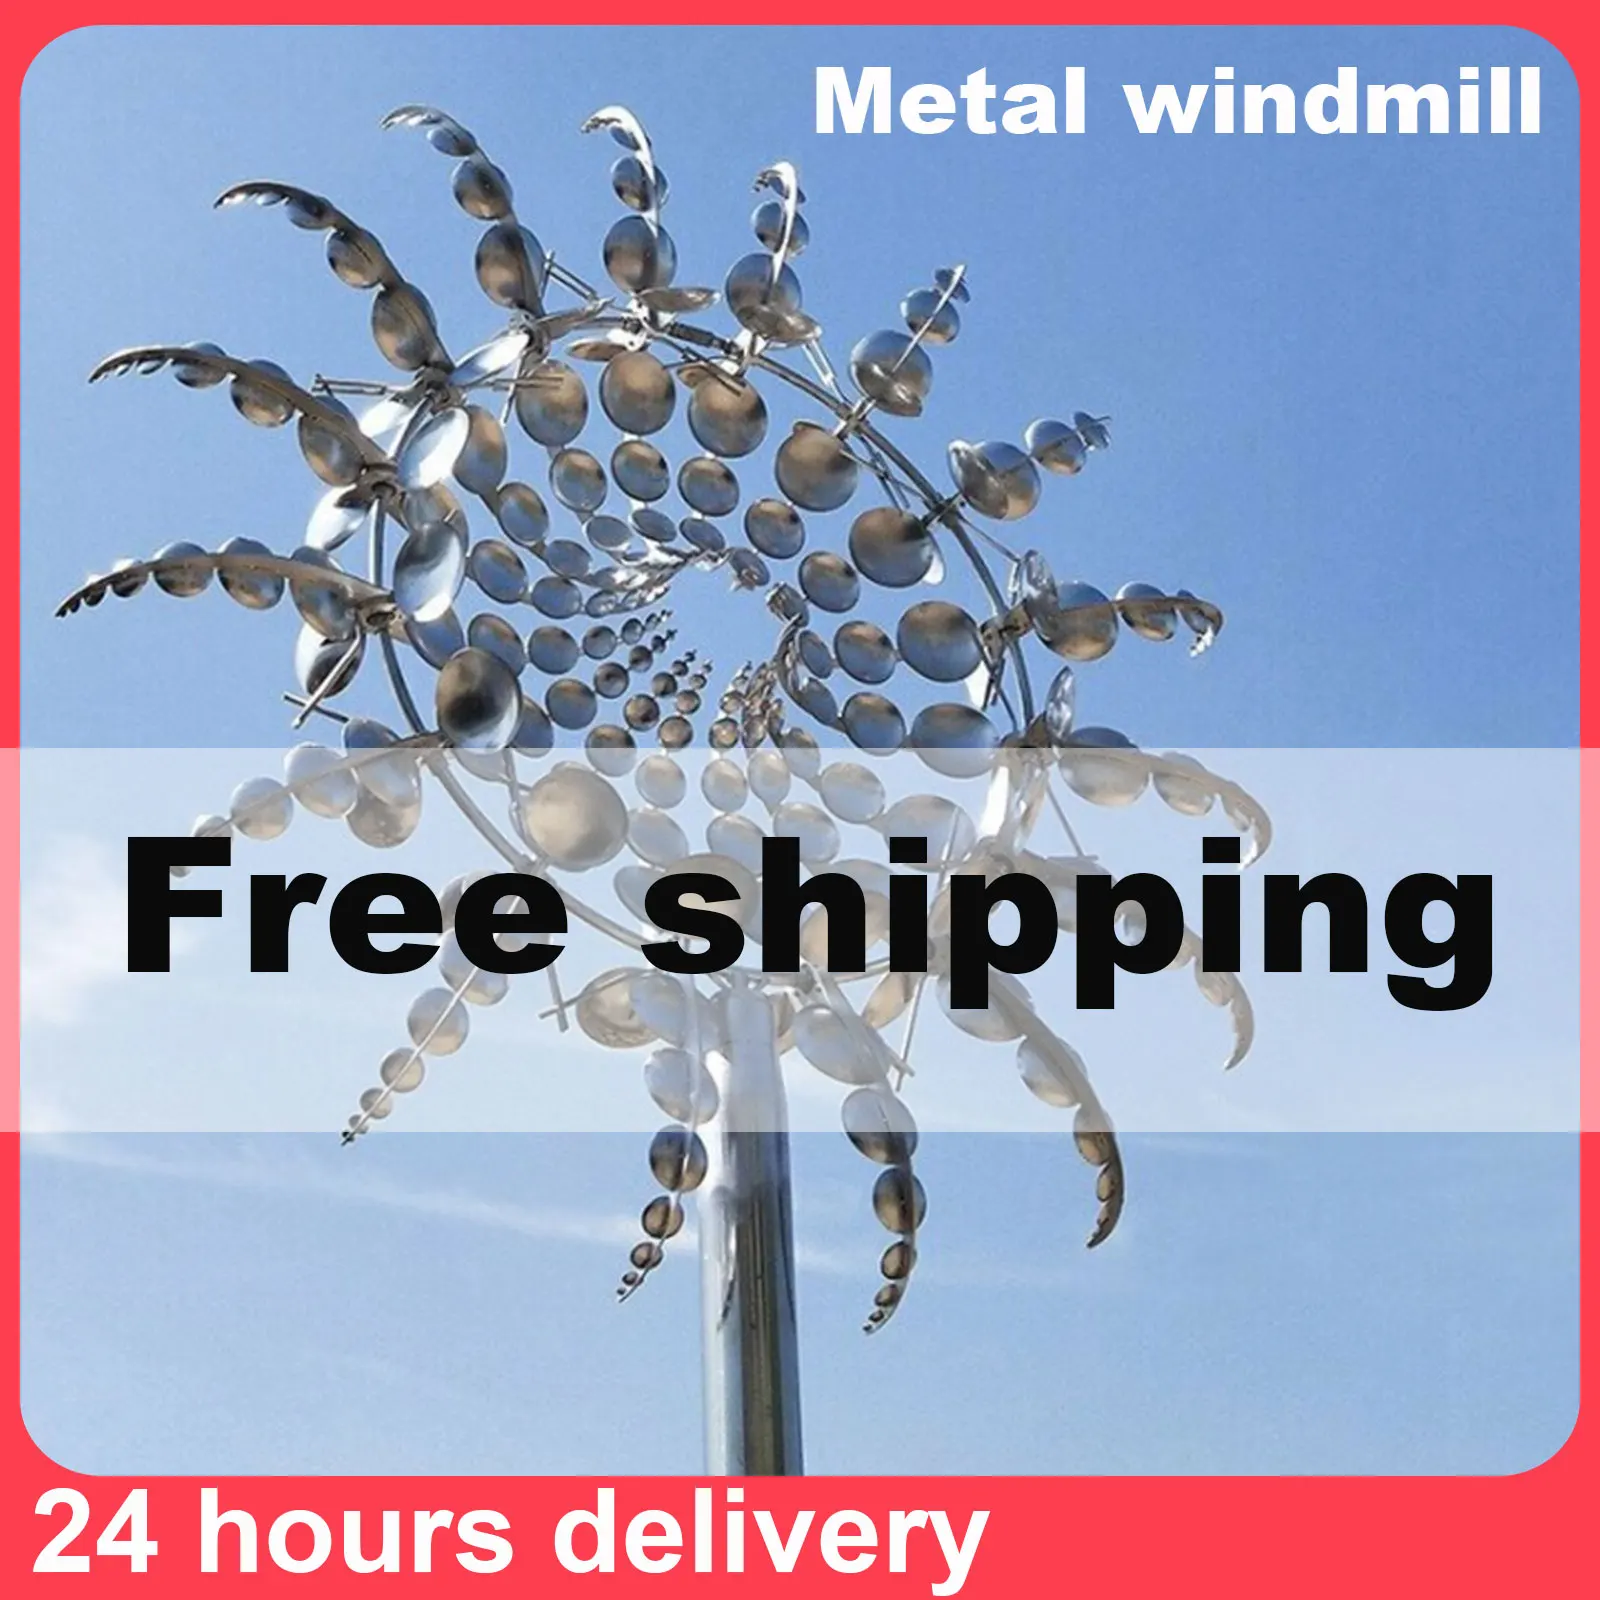 

Unique And Magical Metal Windmill Outdoor Wind Spinners Wind Catchers Yard Patio Lwn Garden Decoration Jardineria Decoracion